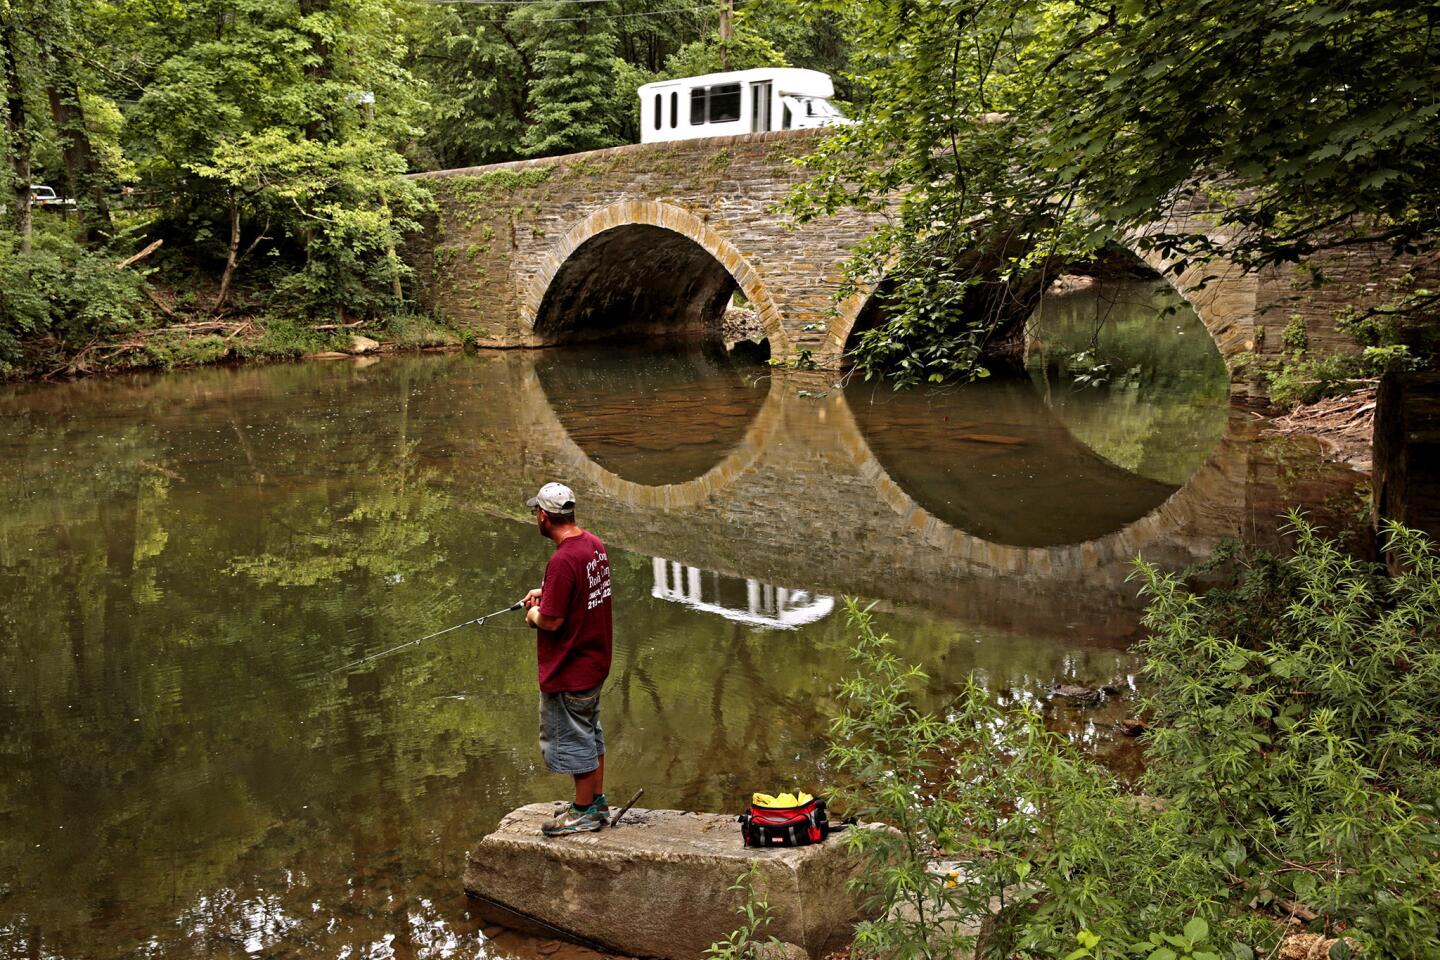 One of the historic bridges of Philadelphia extends Bells Mills Road over the Wissahickon Creek. Many bridges in the area are in need of repair or replacement.